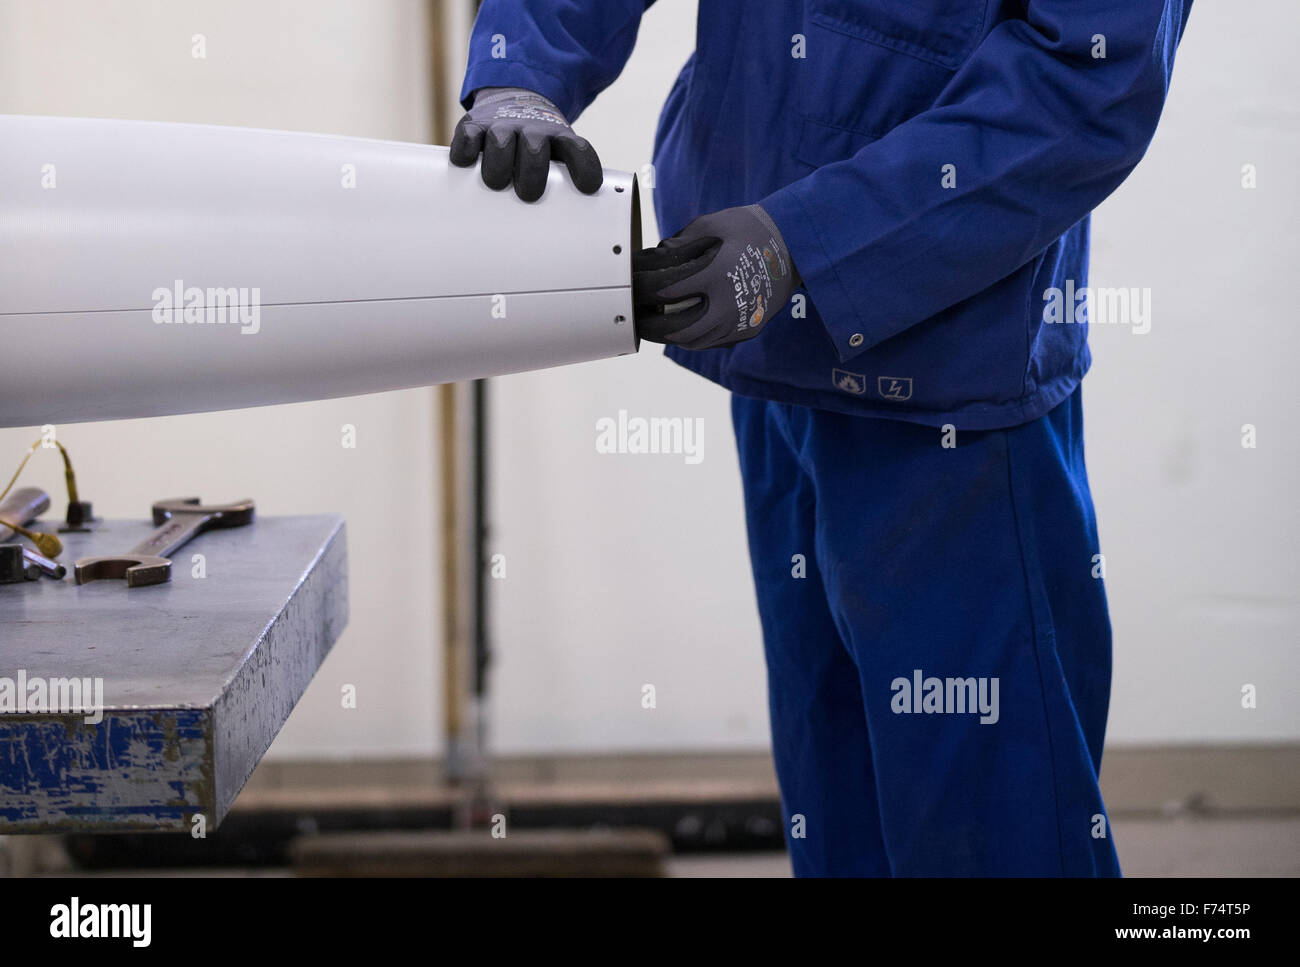 HANDOUT - A handout picture made available on 25 November 2015 by the German armed forces (Bundeswehr) shows an employee of the company Nammo Buck GmbH working on the munition of a M26 MLRS multiple missile launcher in Pinnow, Germany, 25 November 2015. Some 25 years after the end of the Cold War, the last batch of cluster munition of the German armed forces has been dismantled. Employees of a munitions disposal company disassembled the remaining missiles in Pinnow. Photo: JANA NEUMANN/Bundeswehr (ATTENTION EDITORS: FOR EDITORIAL USE ONLY IN CONNECTION WITH CURRENT REPORTING/ MANDATORY CRED Stock Photo